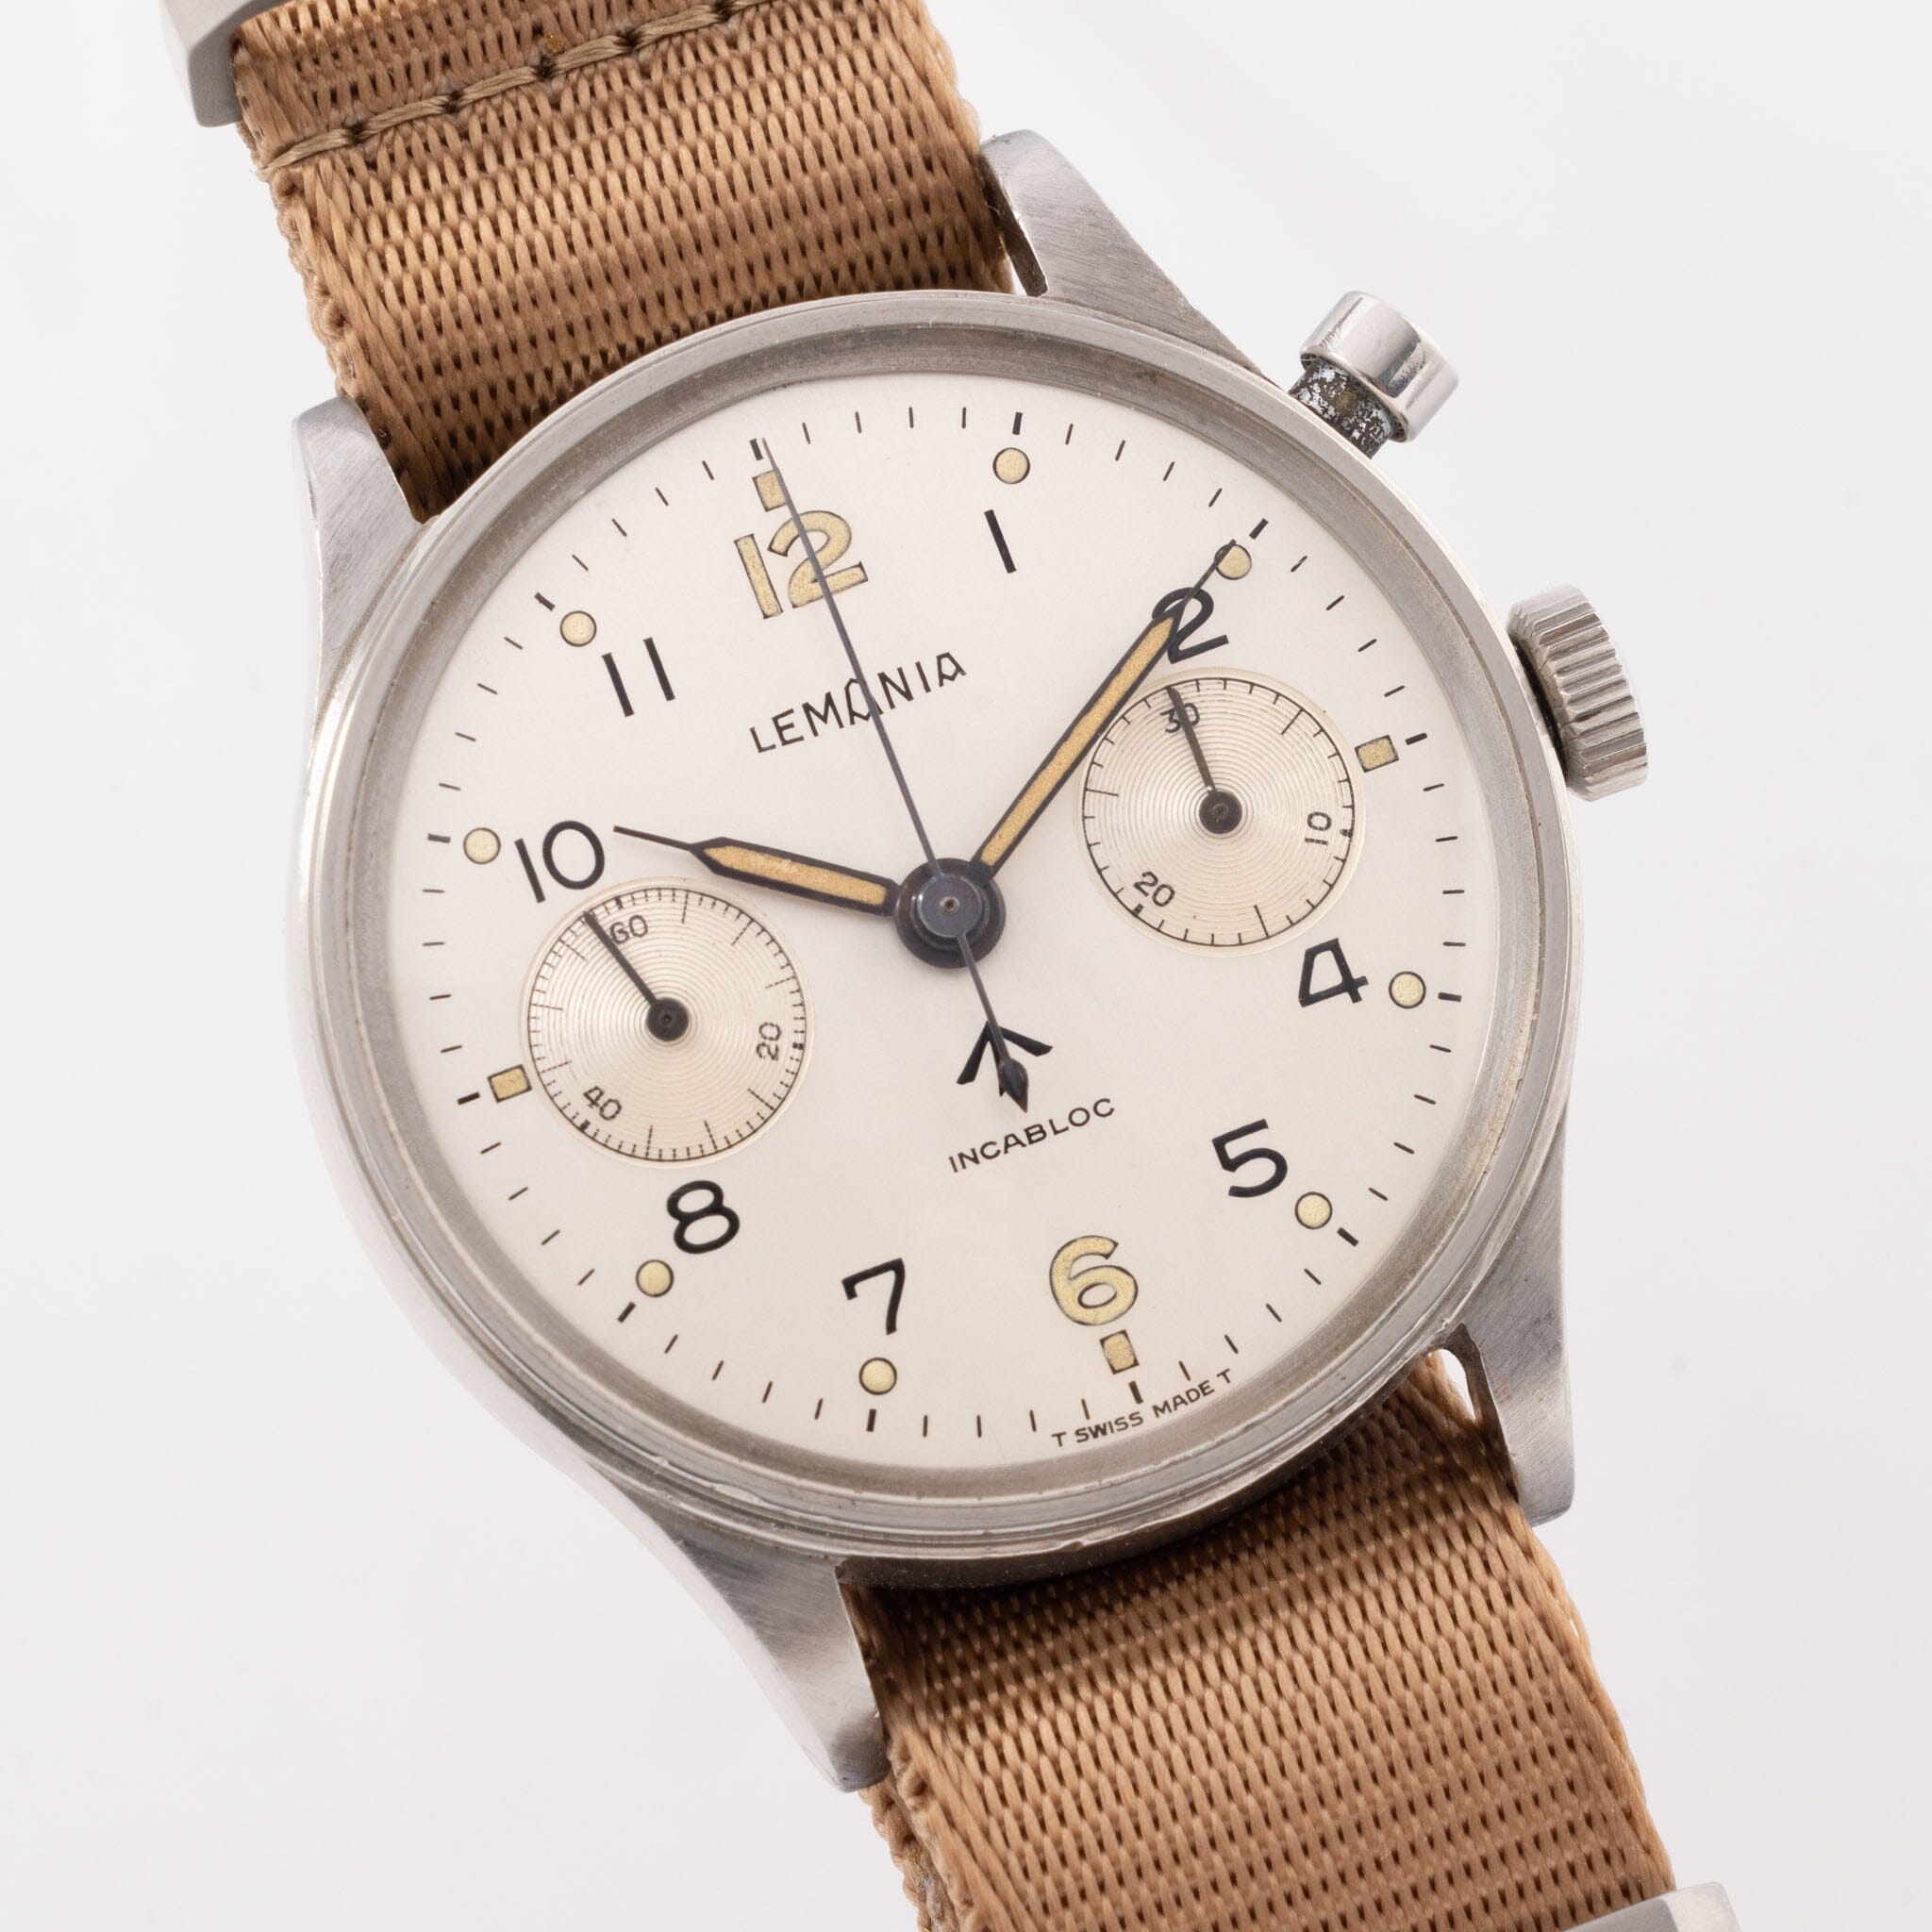 Lemania Monopusher Chronograph Issued to Canadian Naval Forces